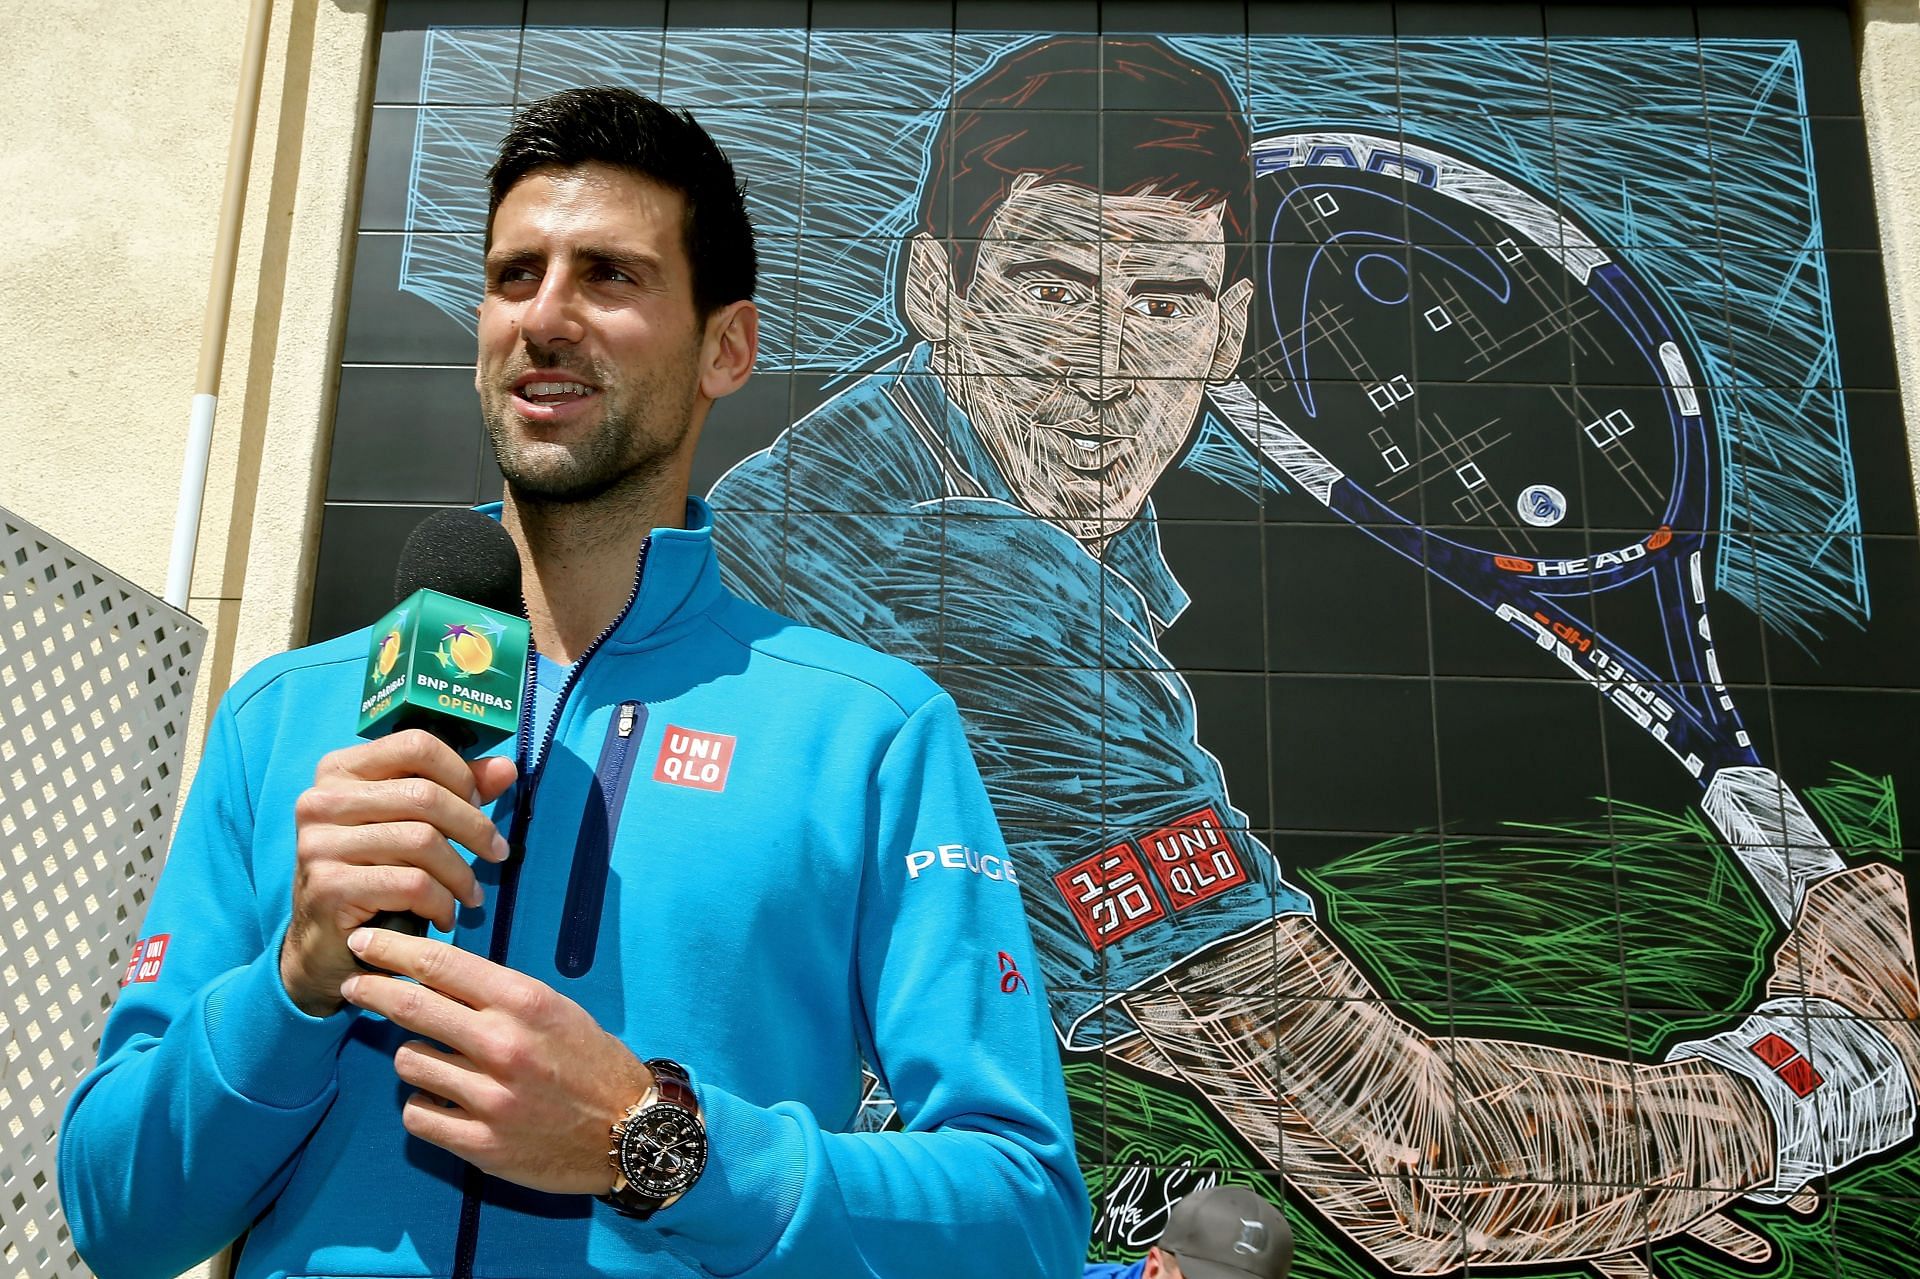 Novak Djokovic has stated that he is willing to miss the Slams but will not get vaccinated